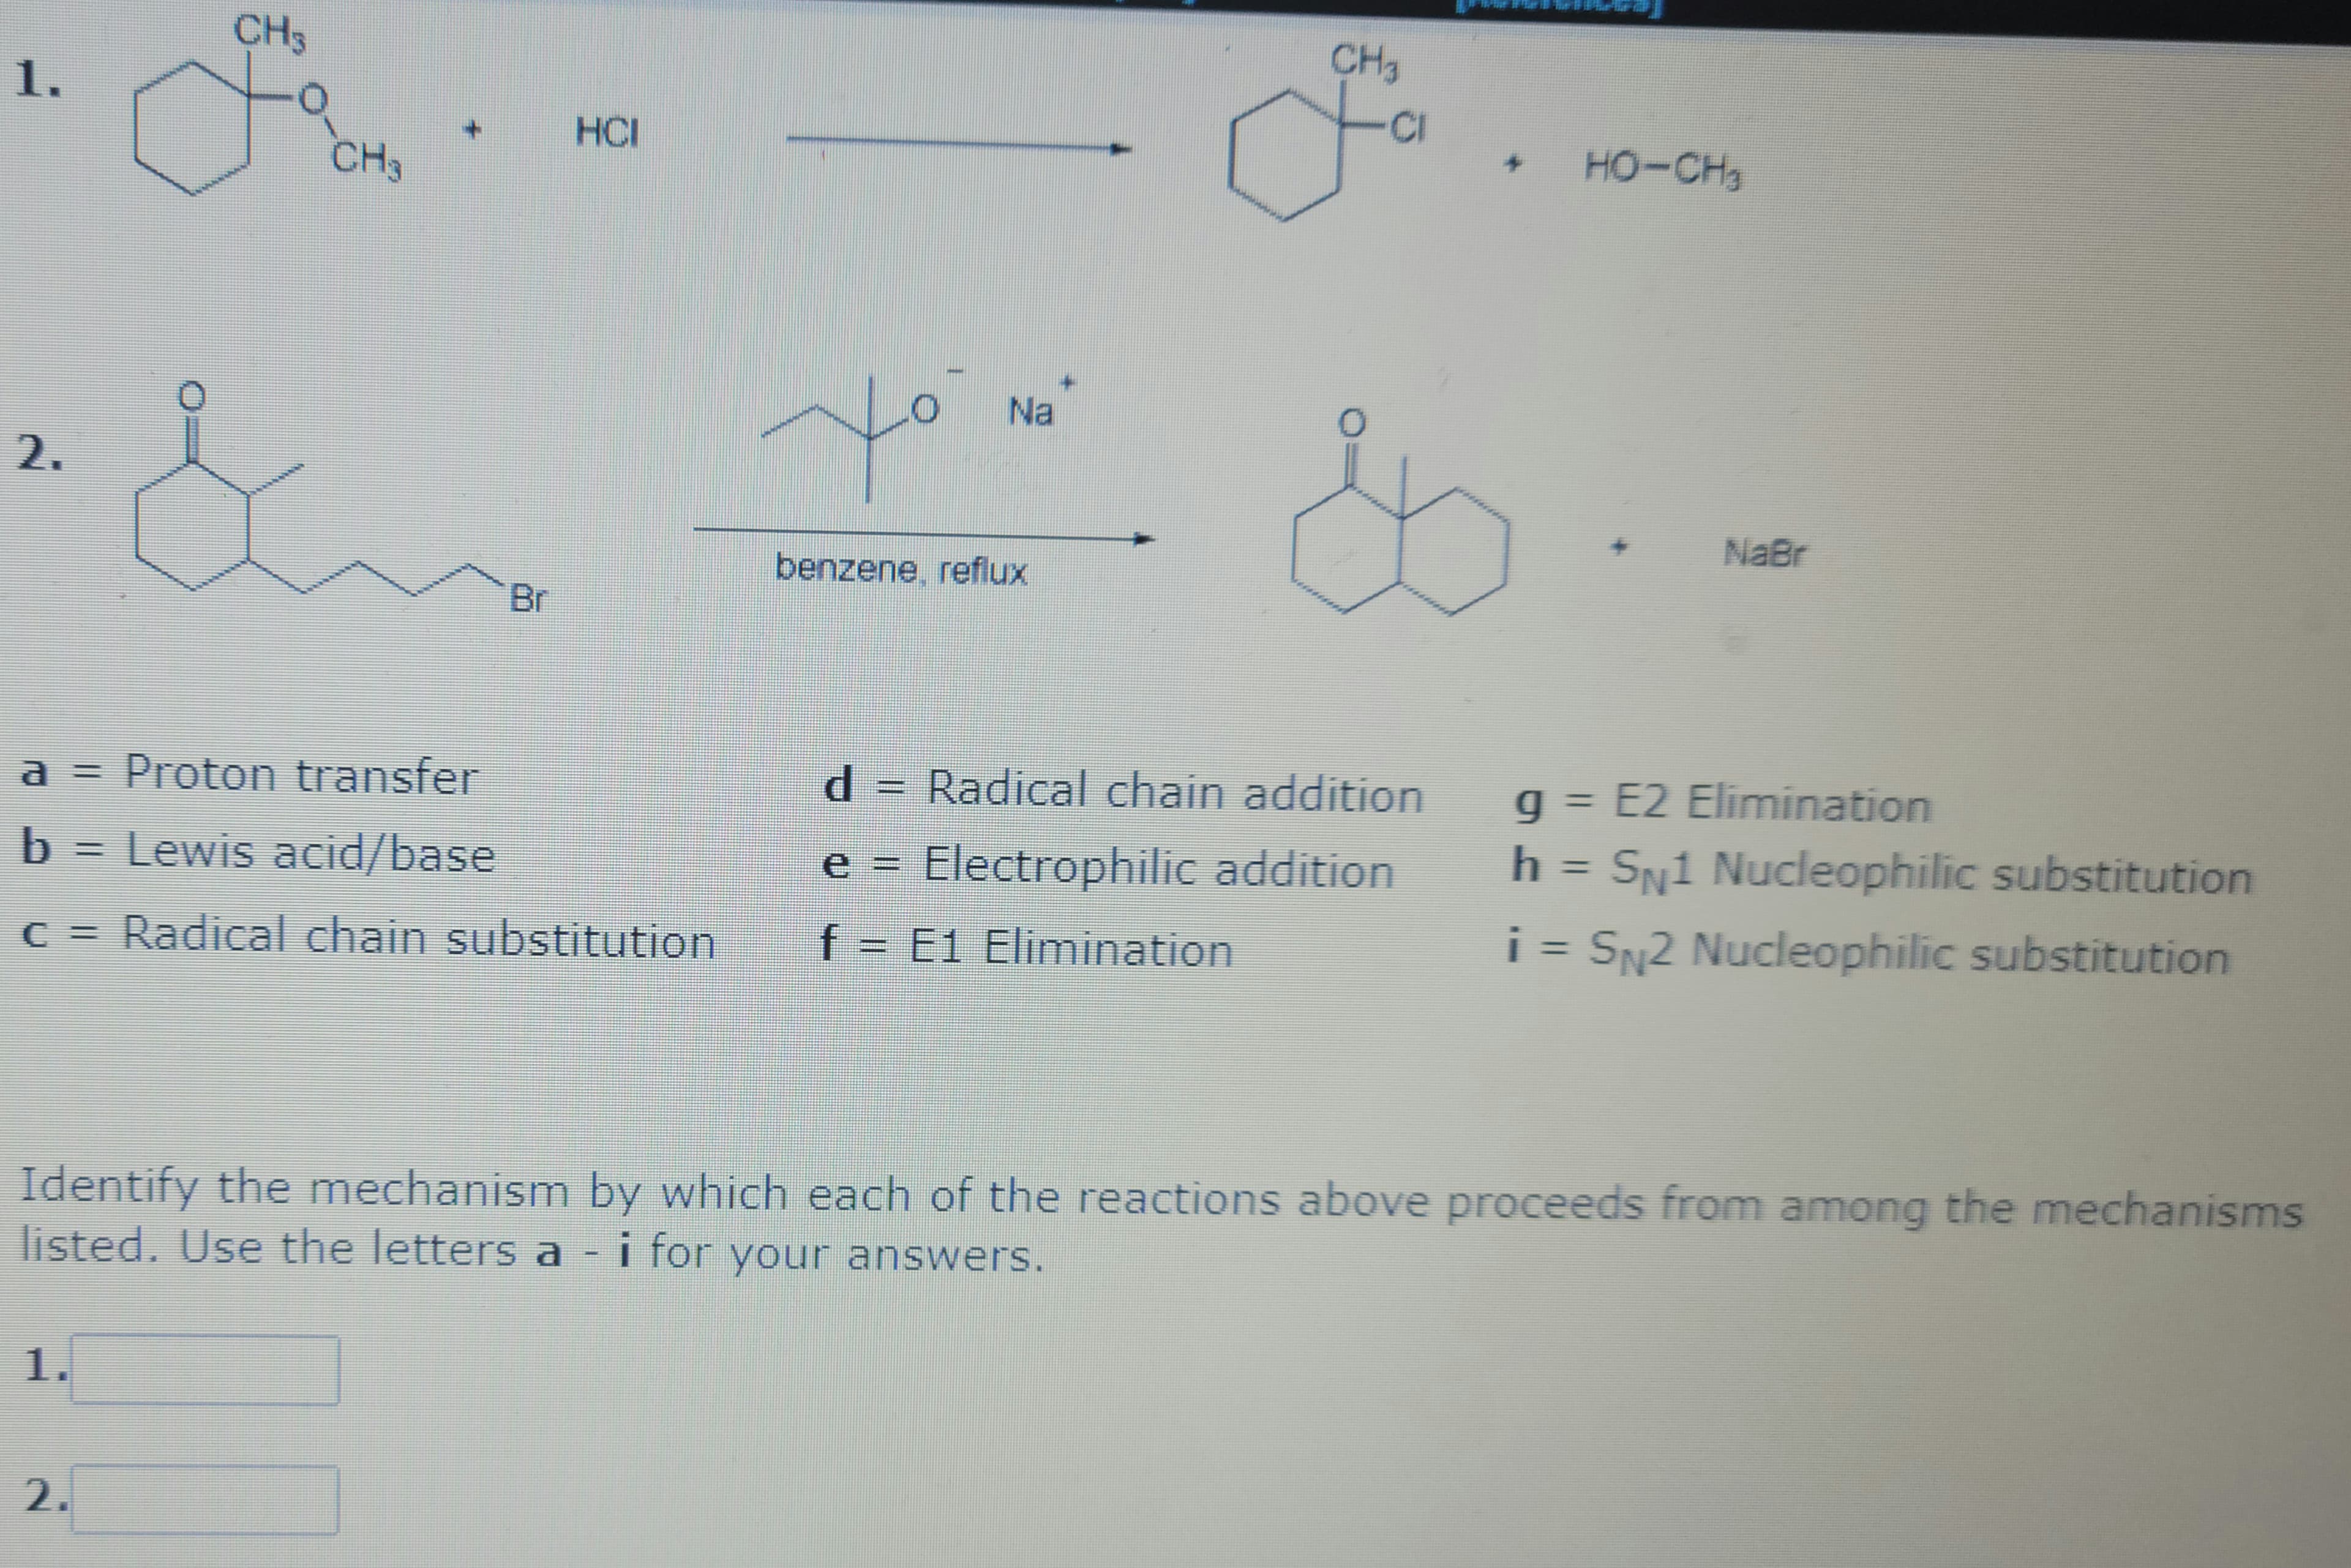 1.
2.
CH3
a
1.
www
2.
CH3
+
Br
a = Proton transfer
b = Lewis acid/base
c = Radical chain substitution
HCI
مار
Na
benzene, reflux
CH₂
d
CI
d Radical chain addition
e = Electrophilic addition
f = E1 Elimination
4
HO-CH
+
NaBr
Identify the mechanism by which each of the reactions above proceeds from among the mechanisms
listed. Use the letters a - i for your answers.
g = E2 Elimination
h = SN1 Nucleophilic substitution
i = SN2 Nucleophilic substitution